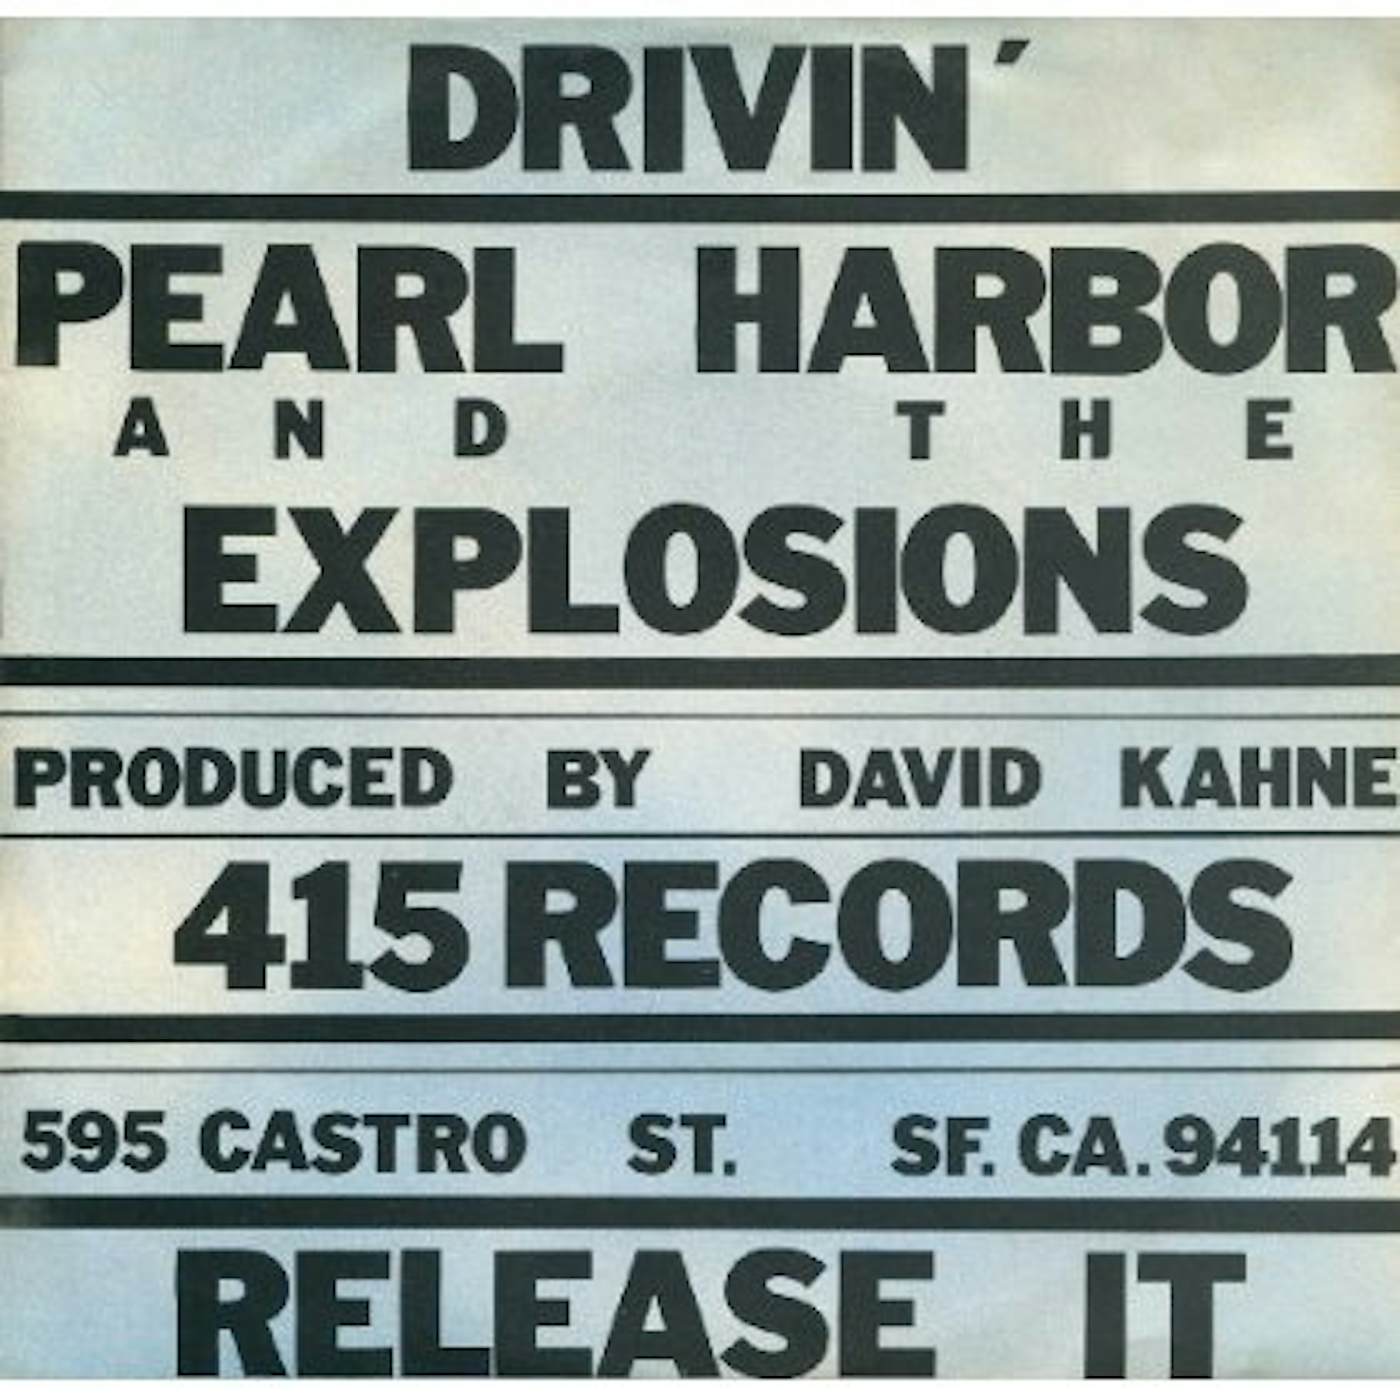 Pearl Harbor & The Explosions DRIVIN & RELEASE IT Vinyl Record